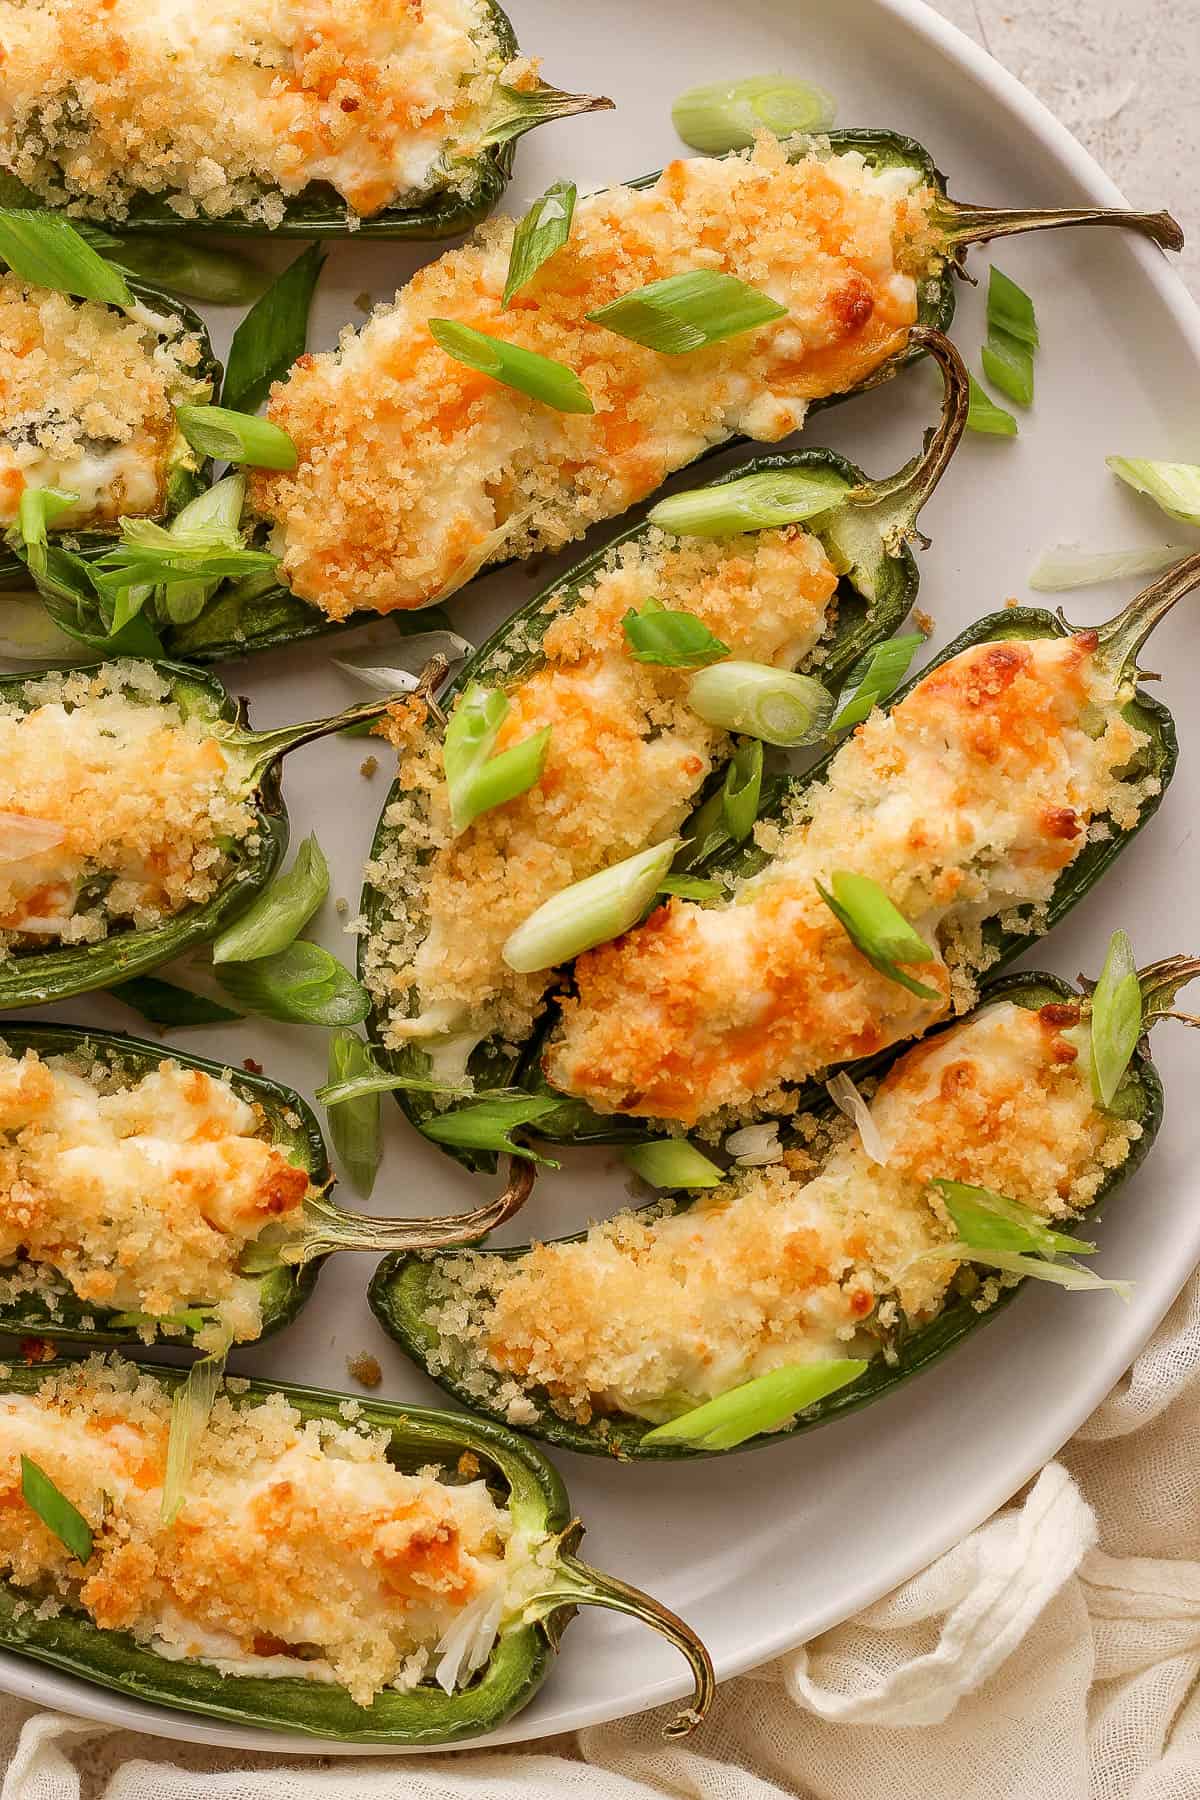 Jalapeño poppers on a plate garnished with sliced green onions.